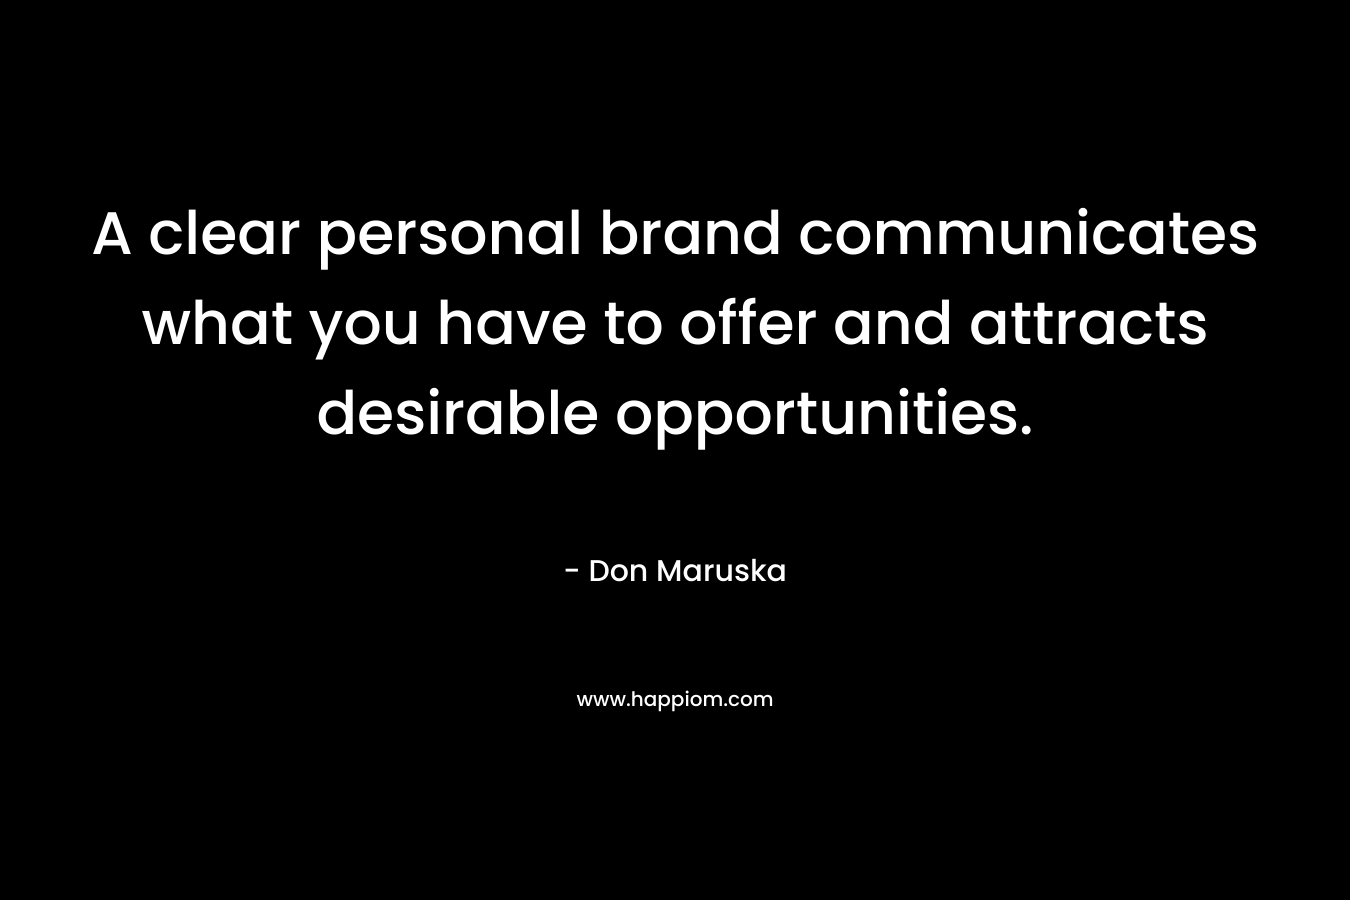 A clear personal brand communicates what you have to offer and attracts desirable opportunities. – Don Maruska